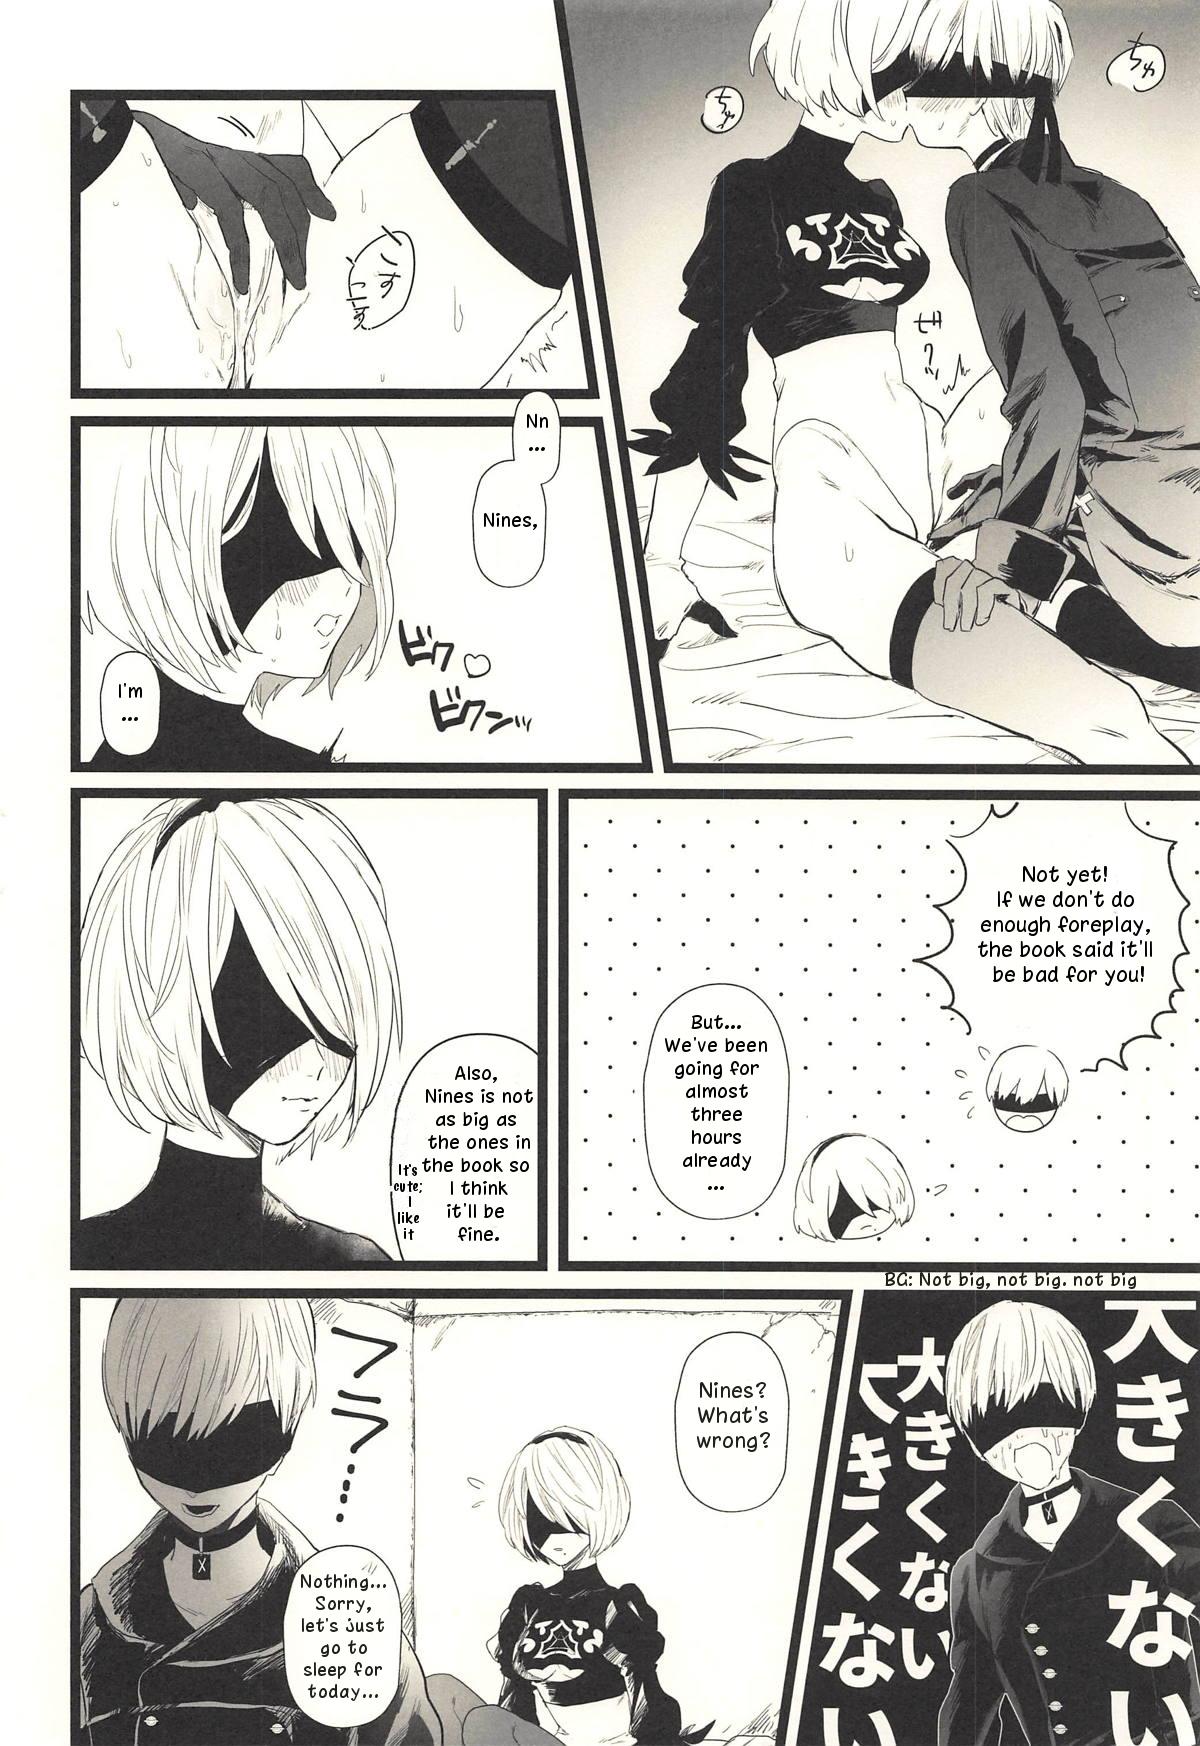 Butt ONE MORE TIME - Nier automata Off - Page 3